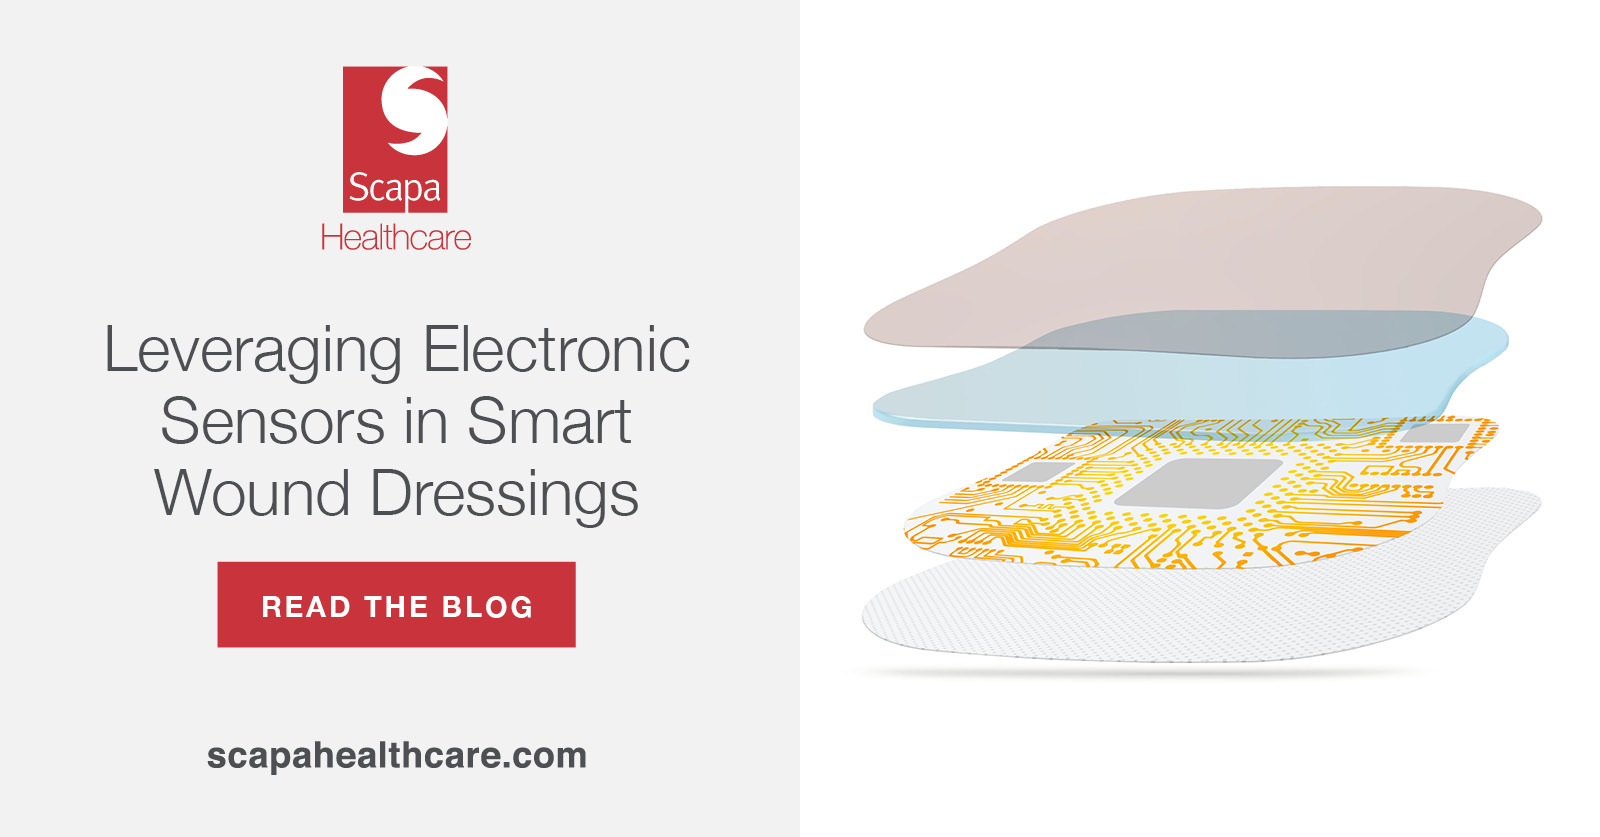 Leveraging Electronic Sensors in Smart Wound Dressings